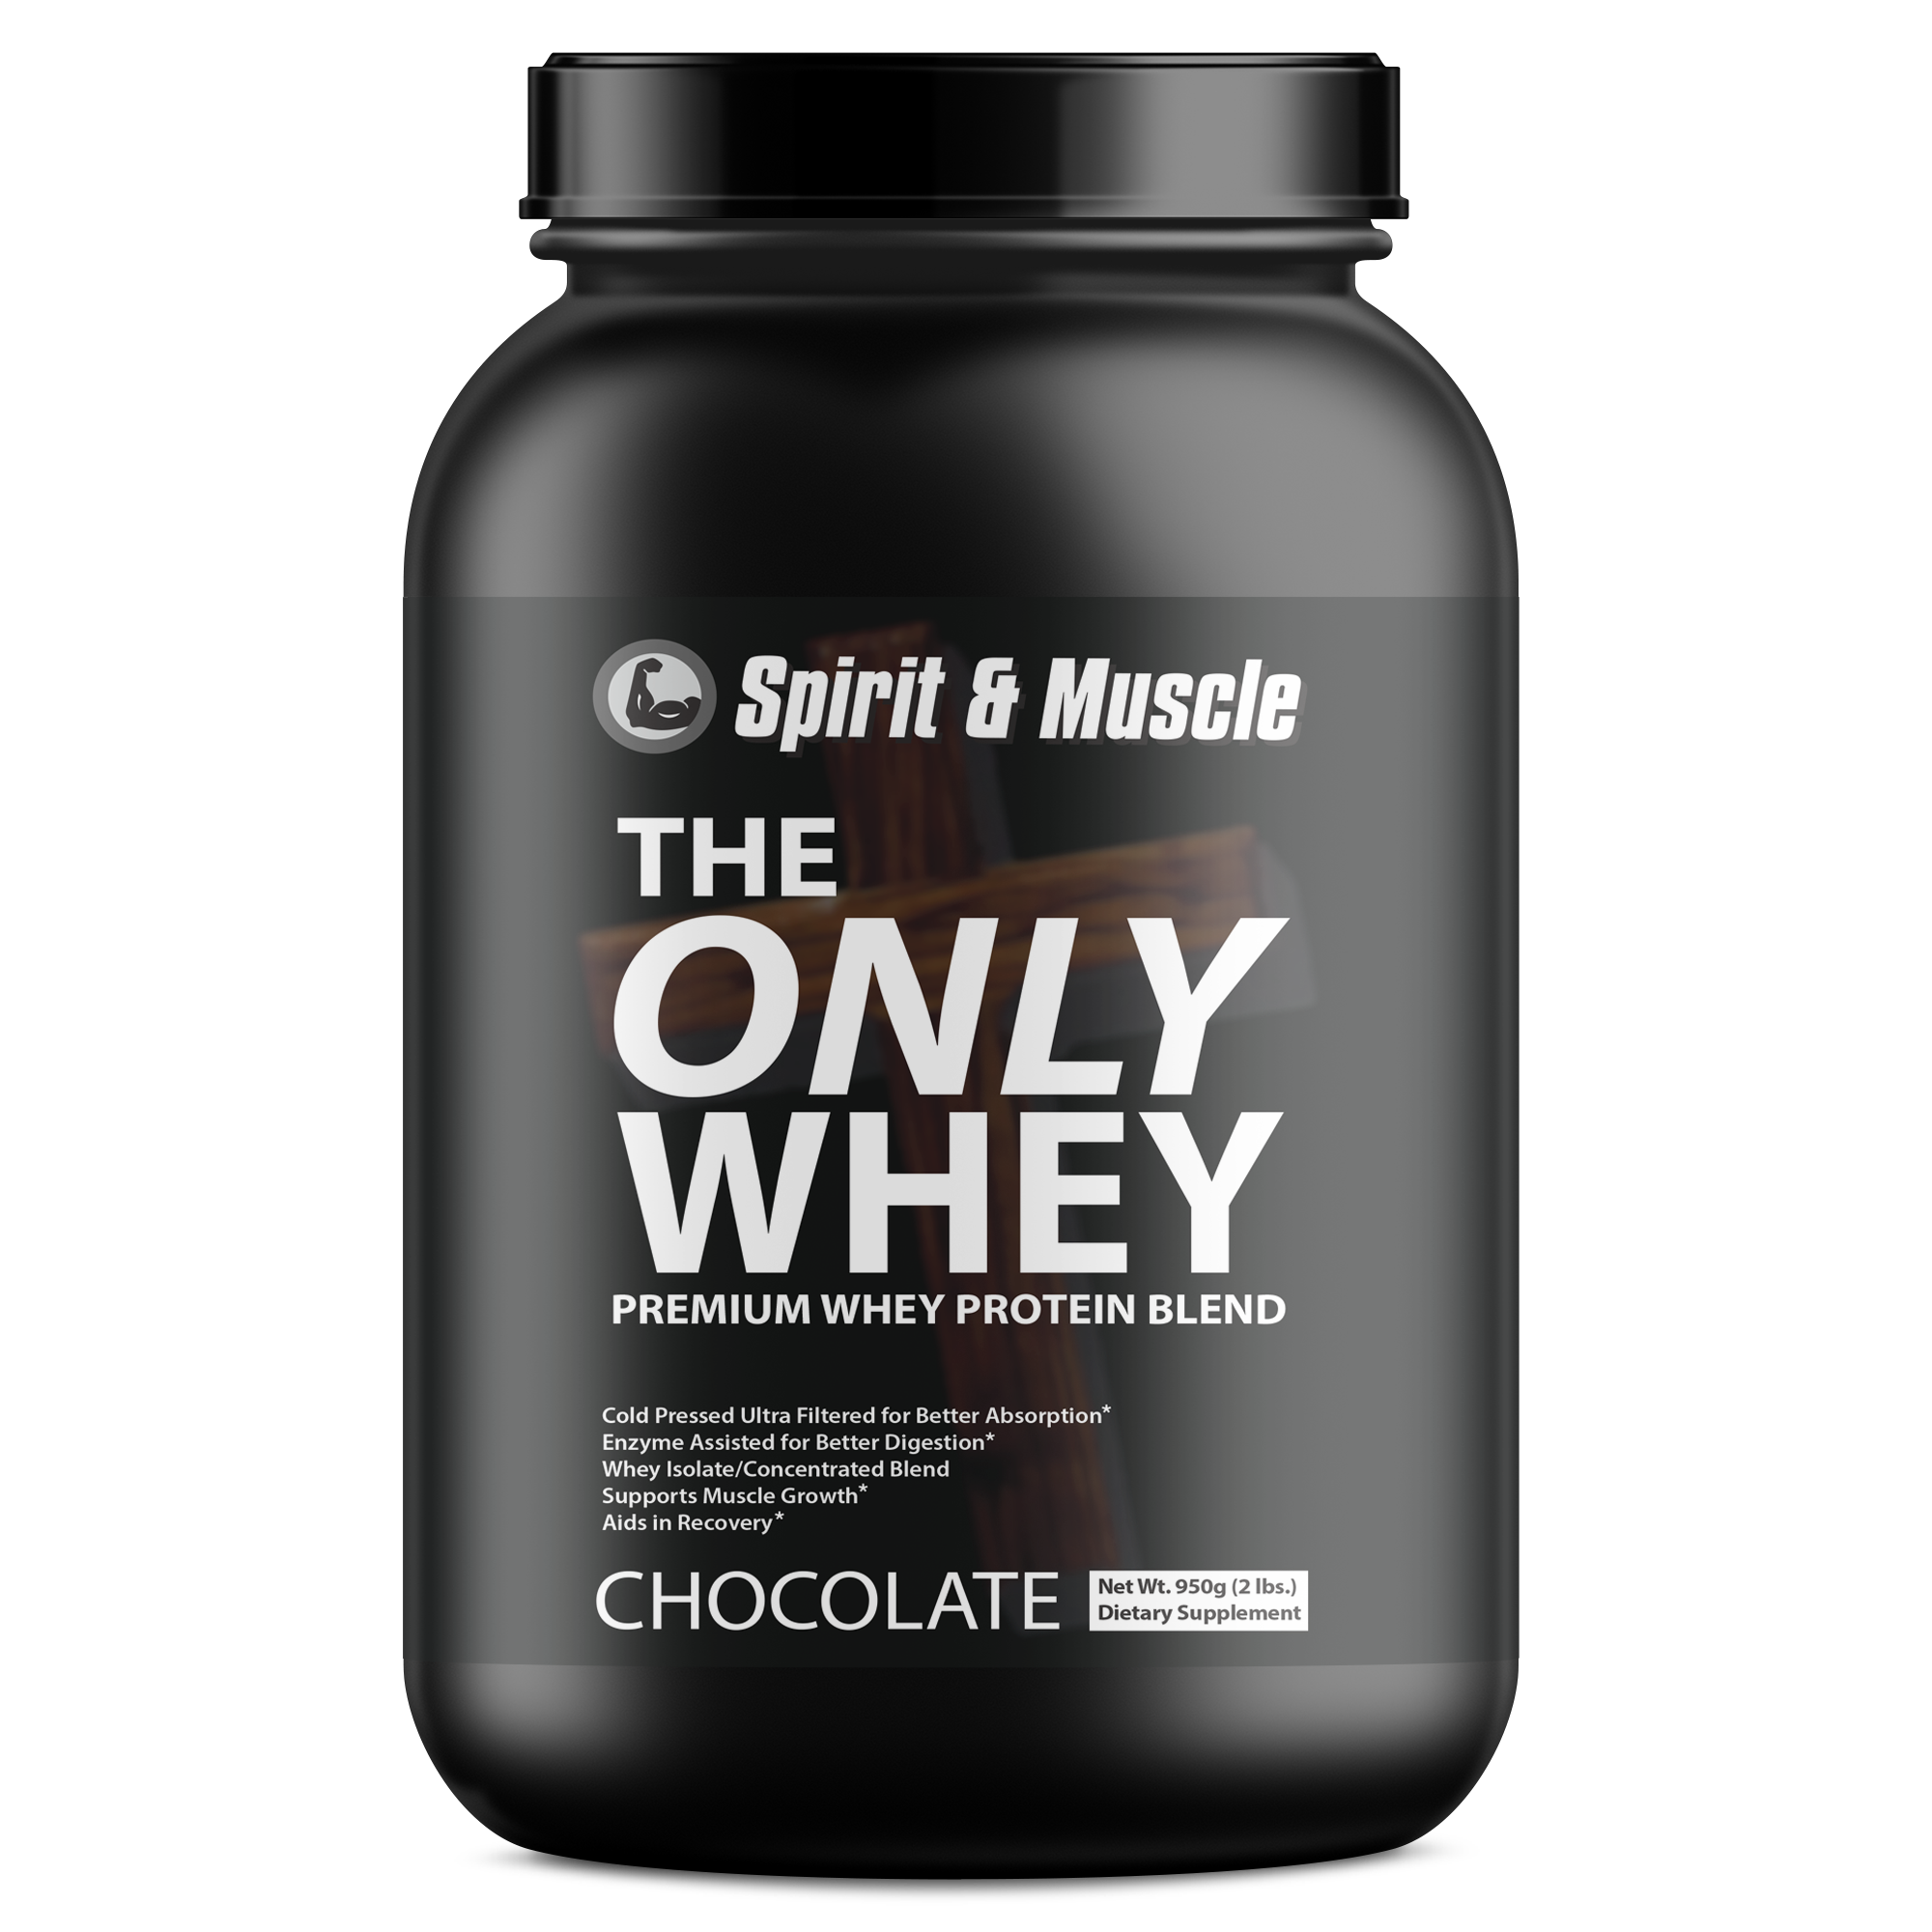 The Only Whey - Chocolate Protein